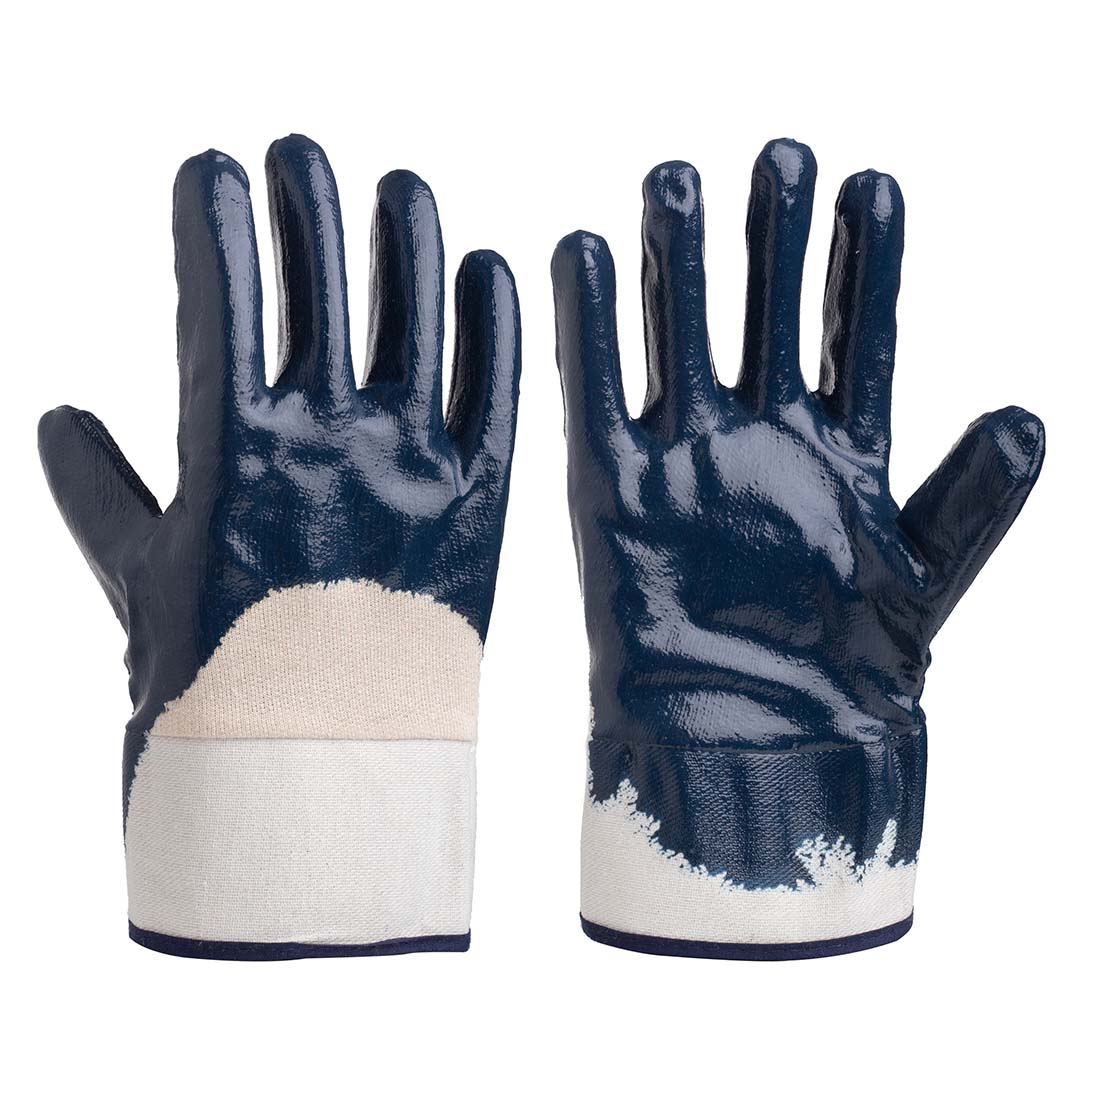 Safety cuff Heavy gloves | Nitrile half coated gloves | Half coated gloves